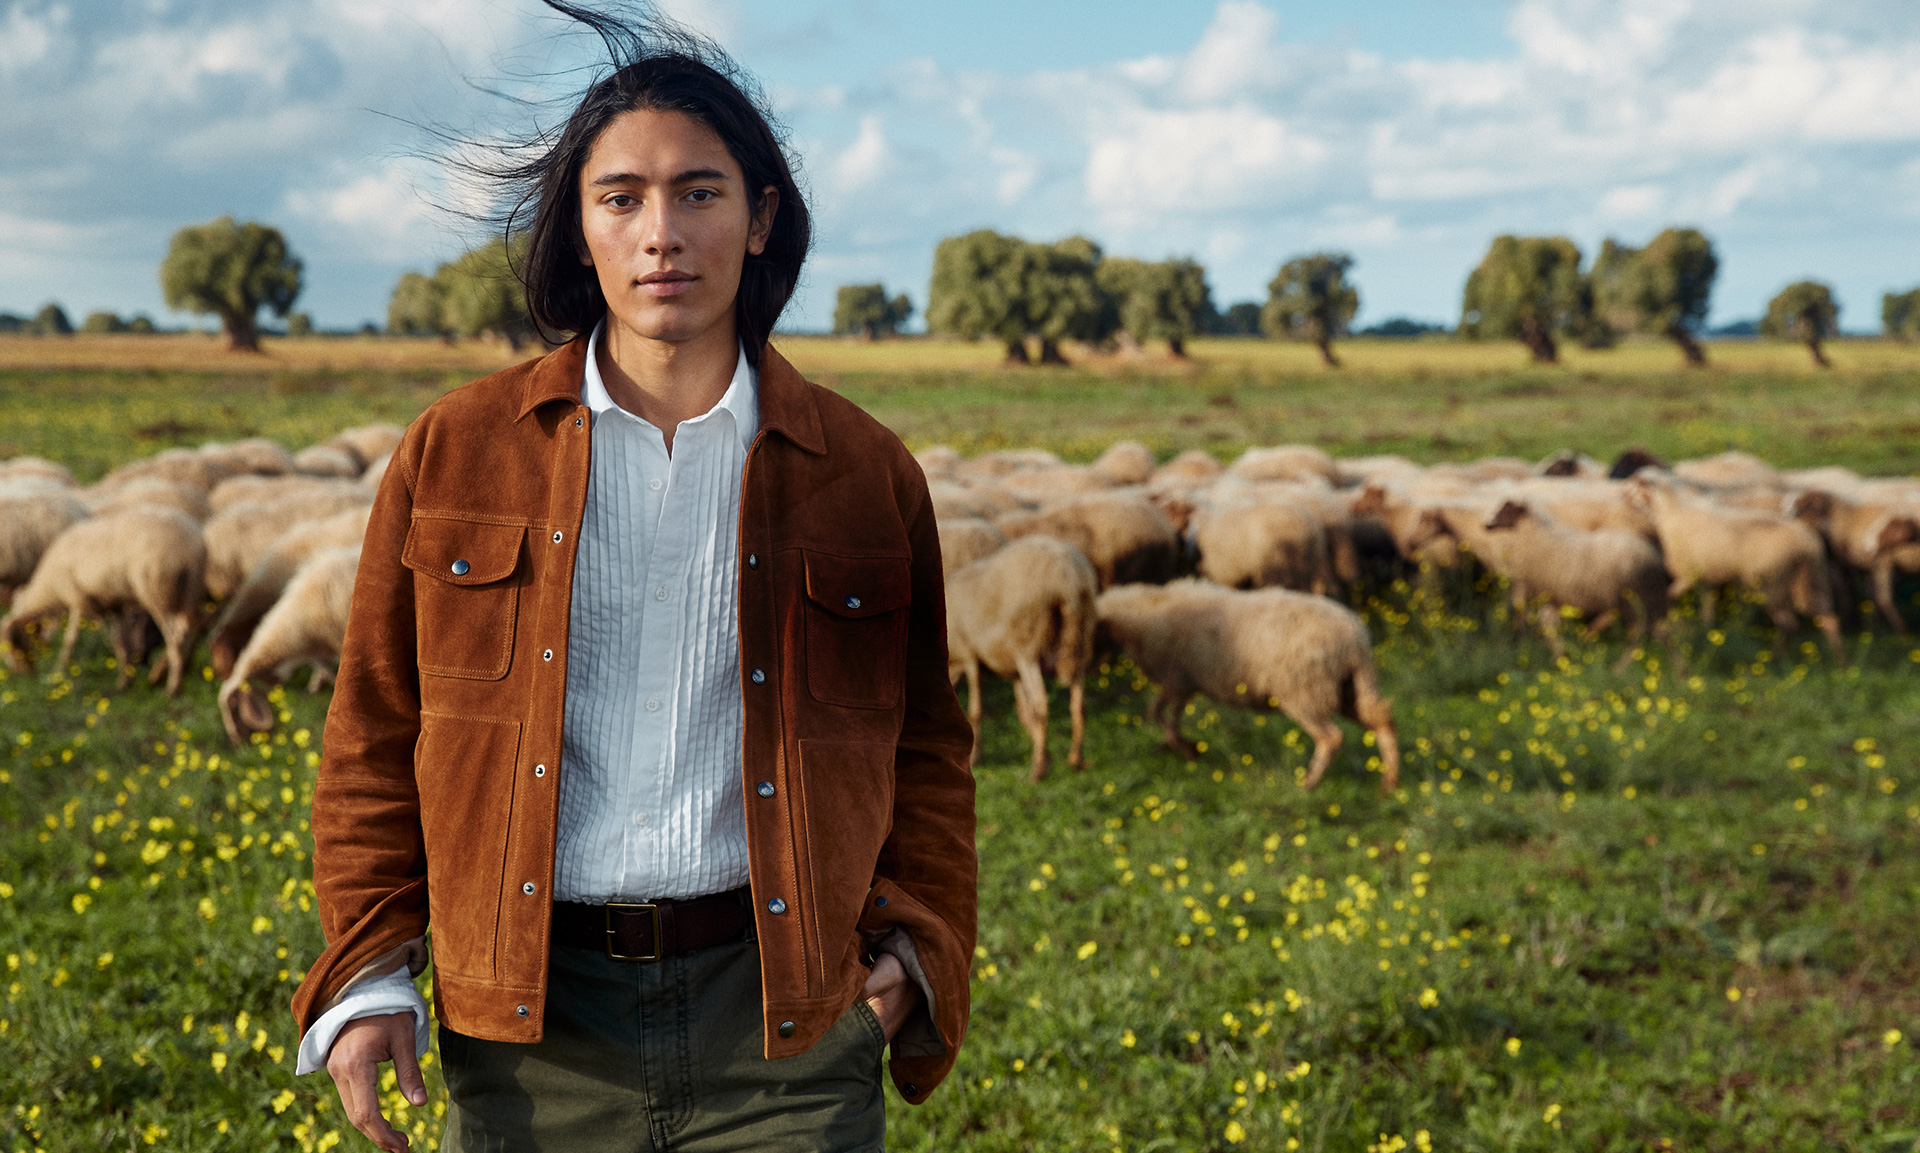 CONSCIOUS Colletion. Explore our full range of more sustainably made styles.